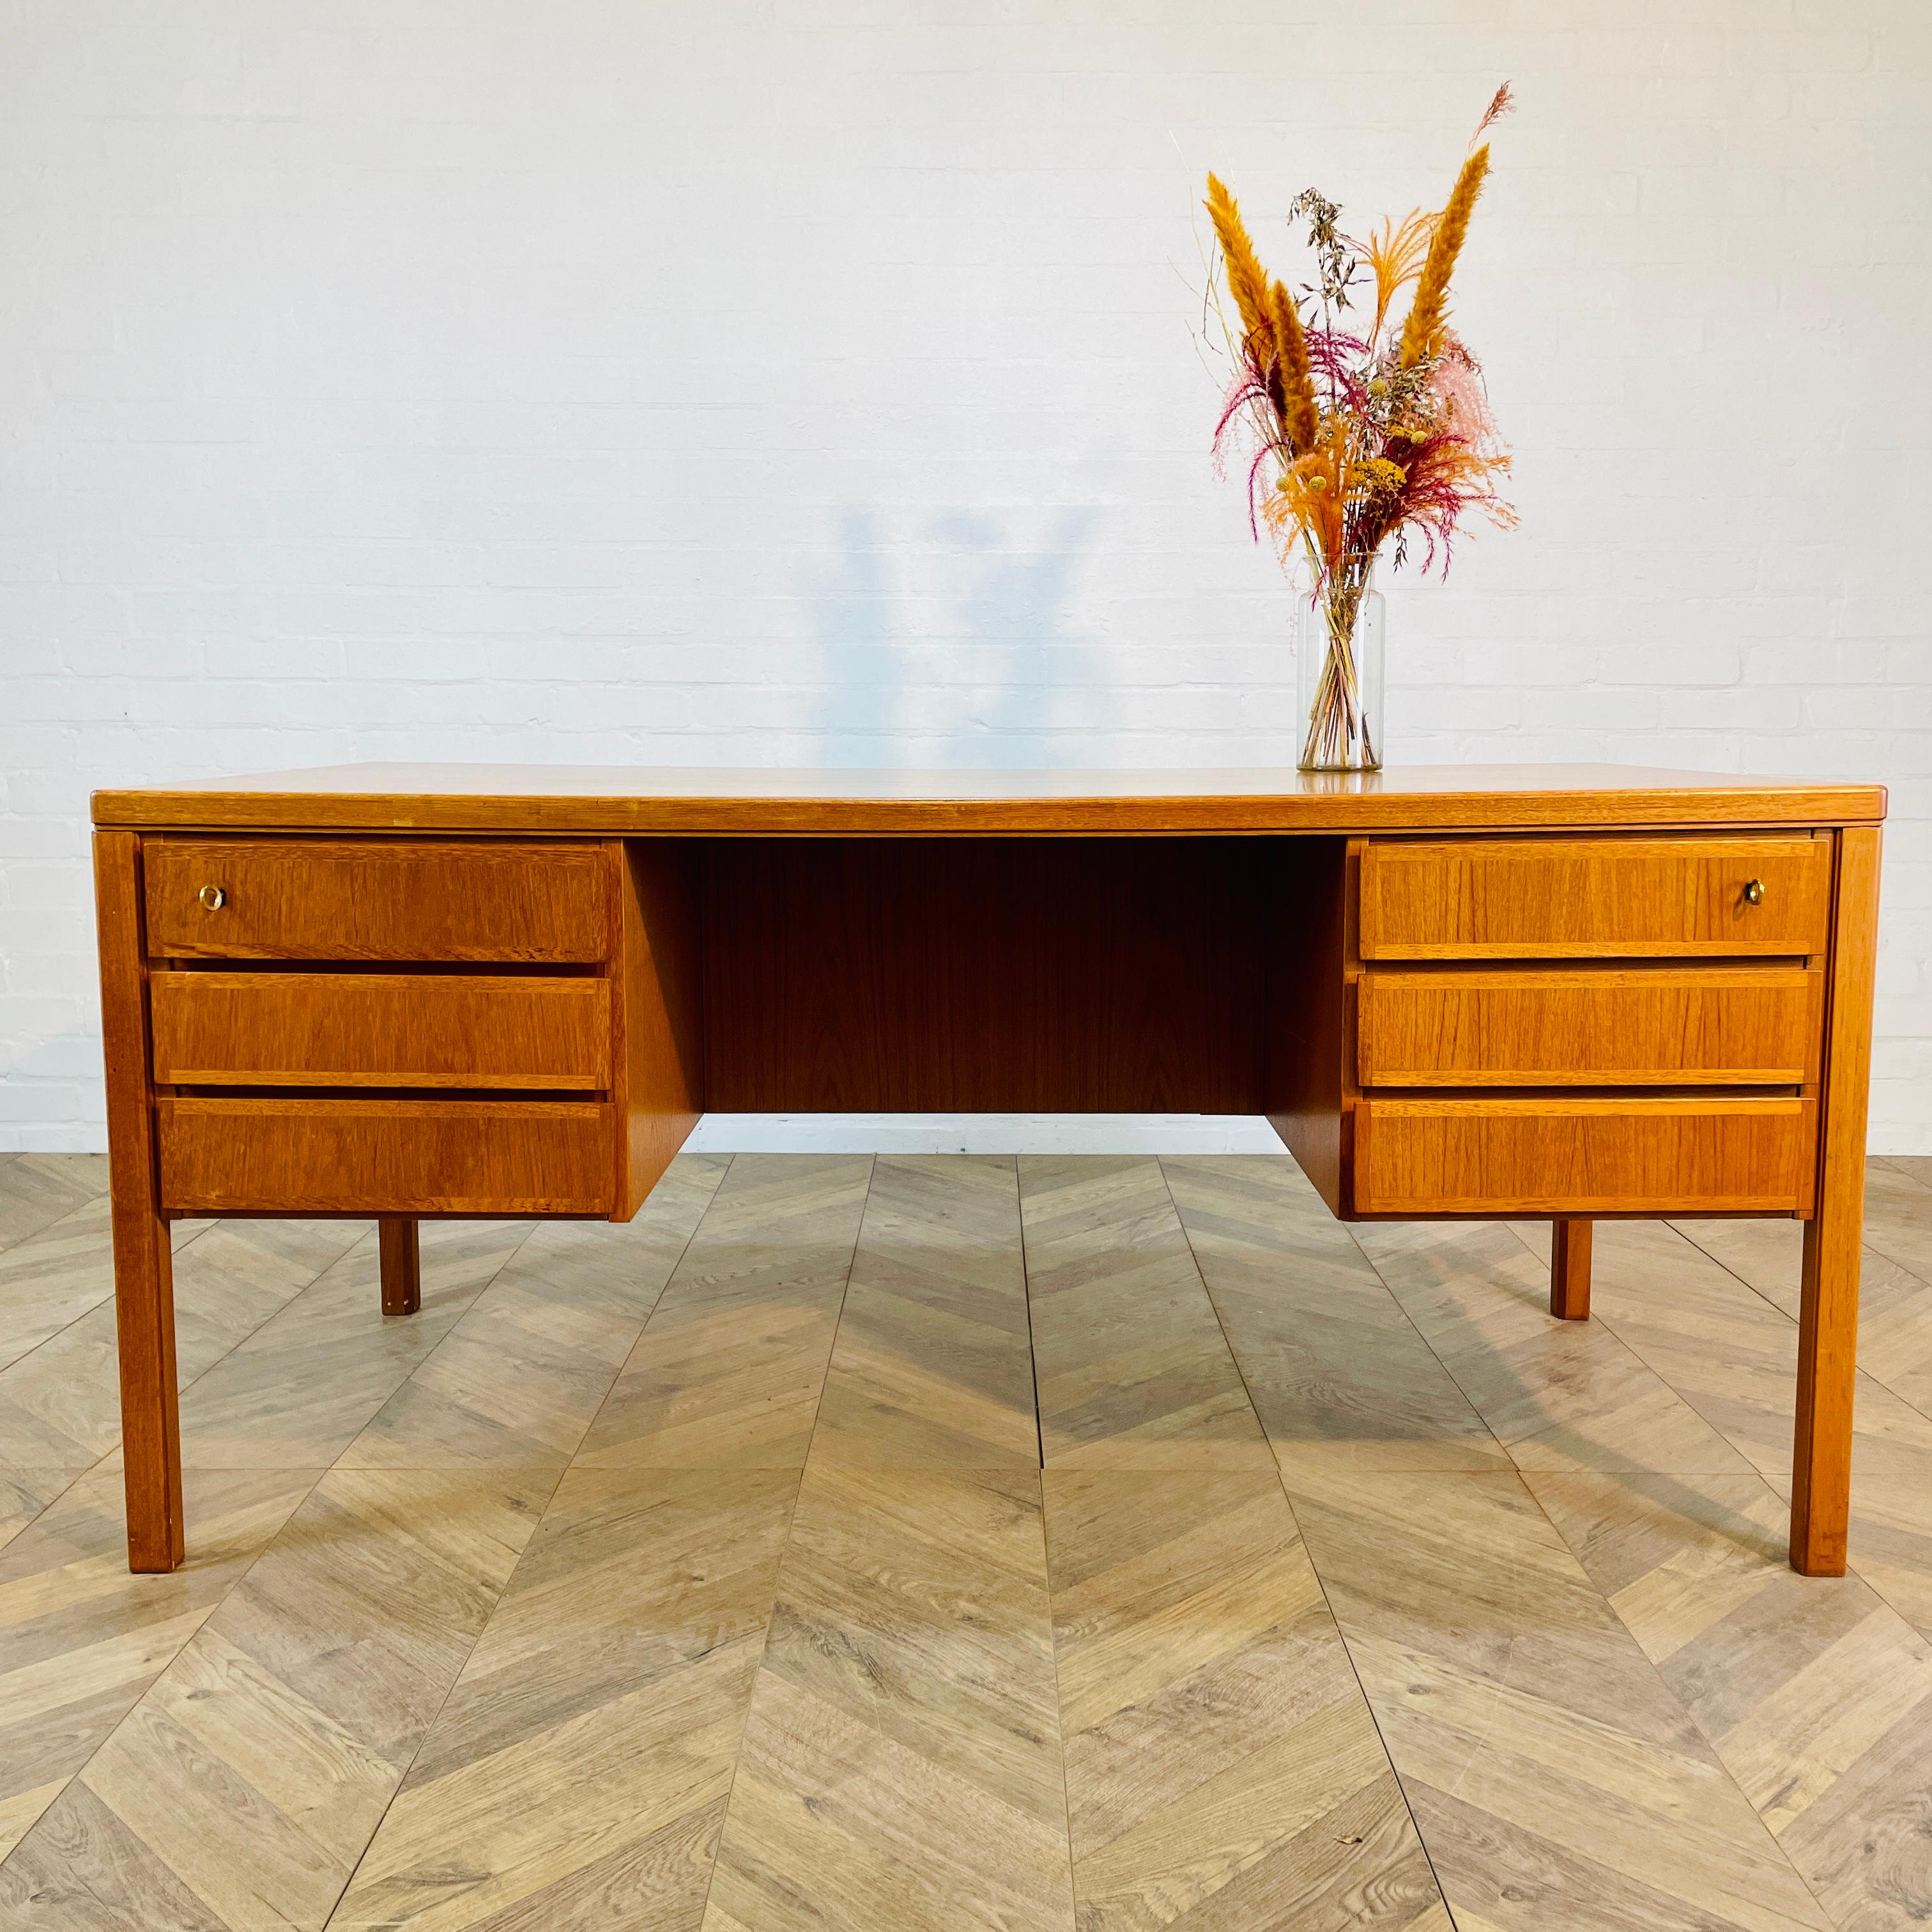 A Beautiful Double-Sided Desk, Model 77 Executive Desk Designed By Gunni Omann For Omann Jun Mobelfabrik, Denmark. Circa 1960s.

The desk is in excellent vintage condition with only small age related marks and scuffs. (please see photos).

The desk